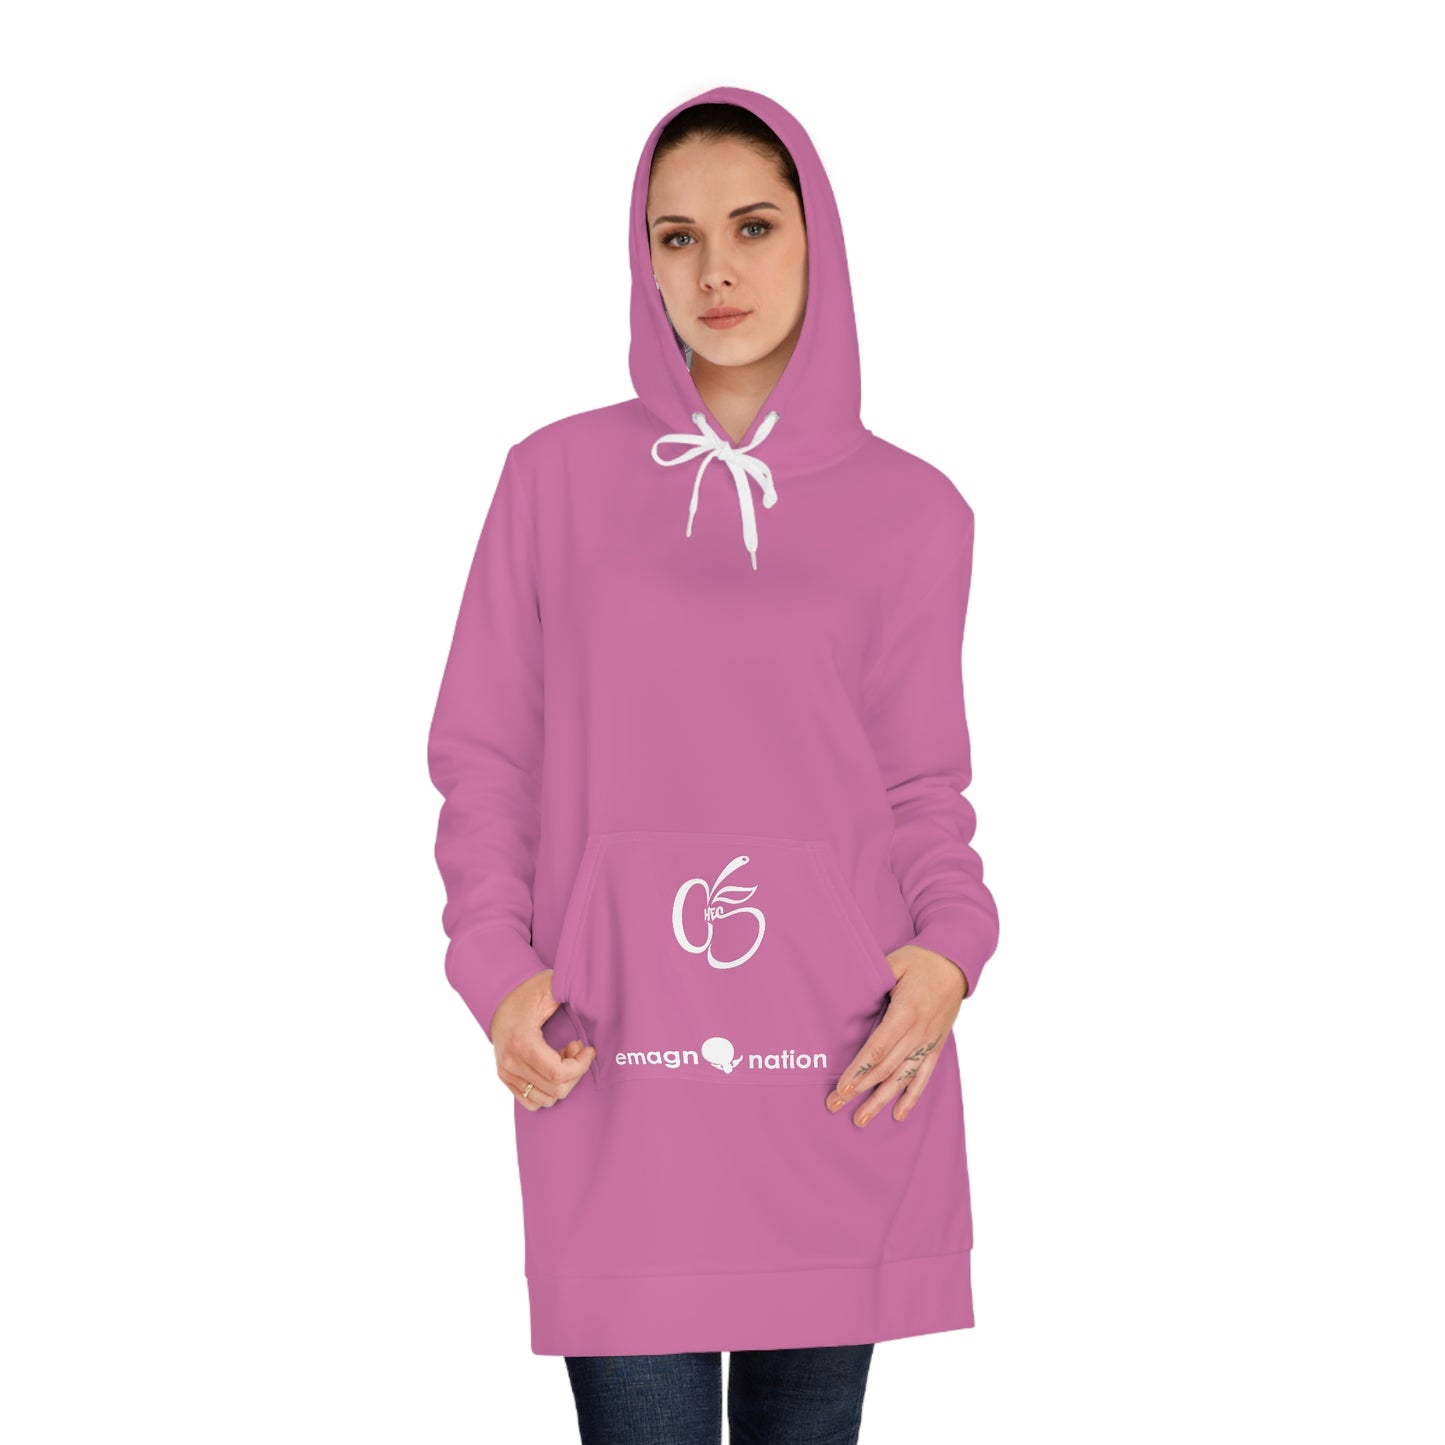 Queen Ches Ladies Hoodie Dress (Light Pink)